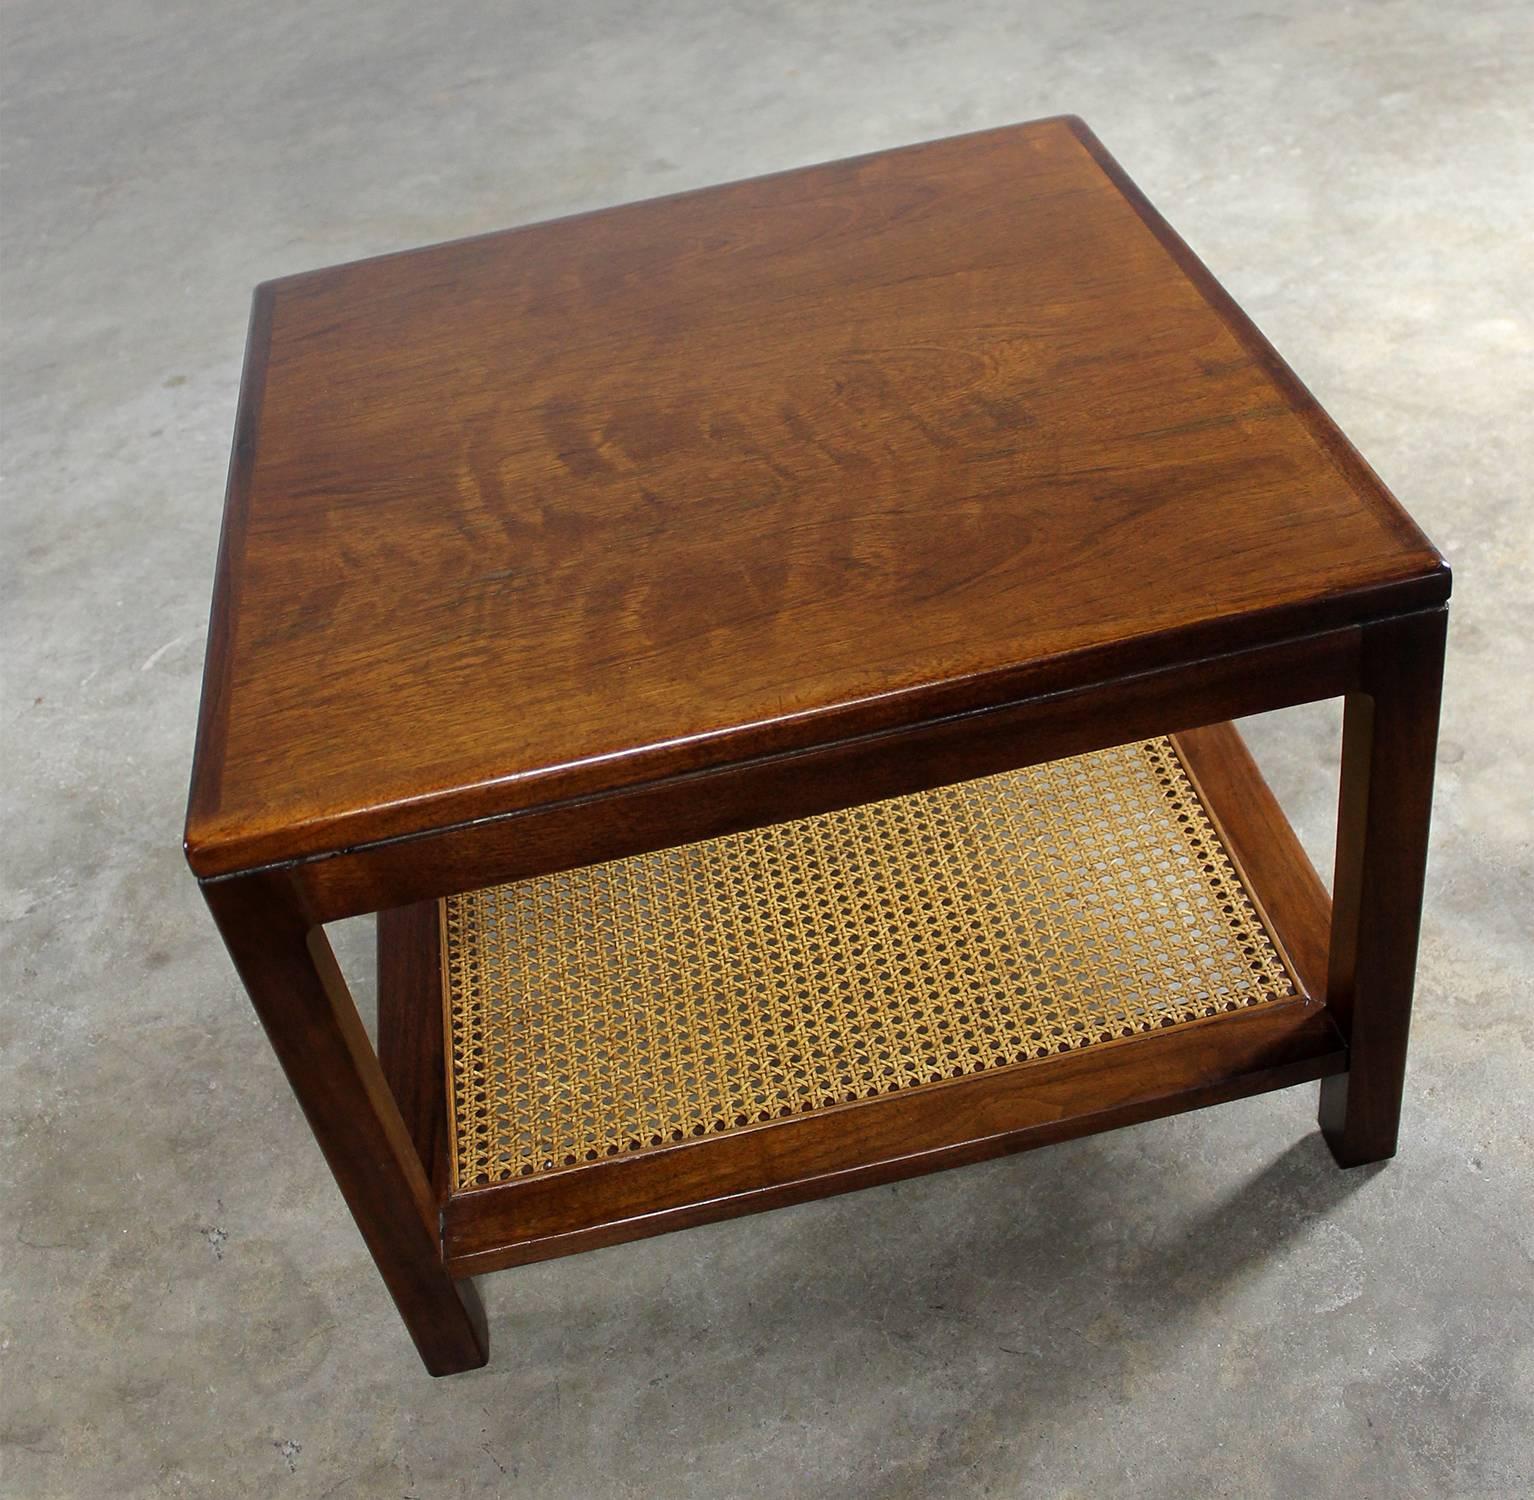 20th Century Founders Furniture Square End Table, Vintage, Mid-Century Modern